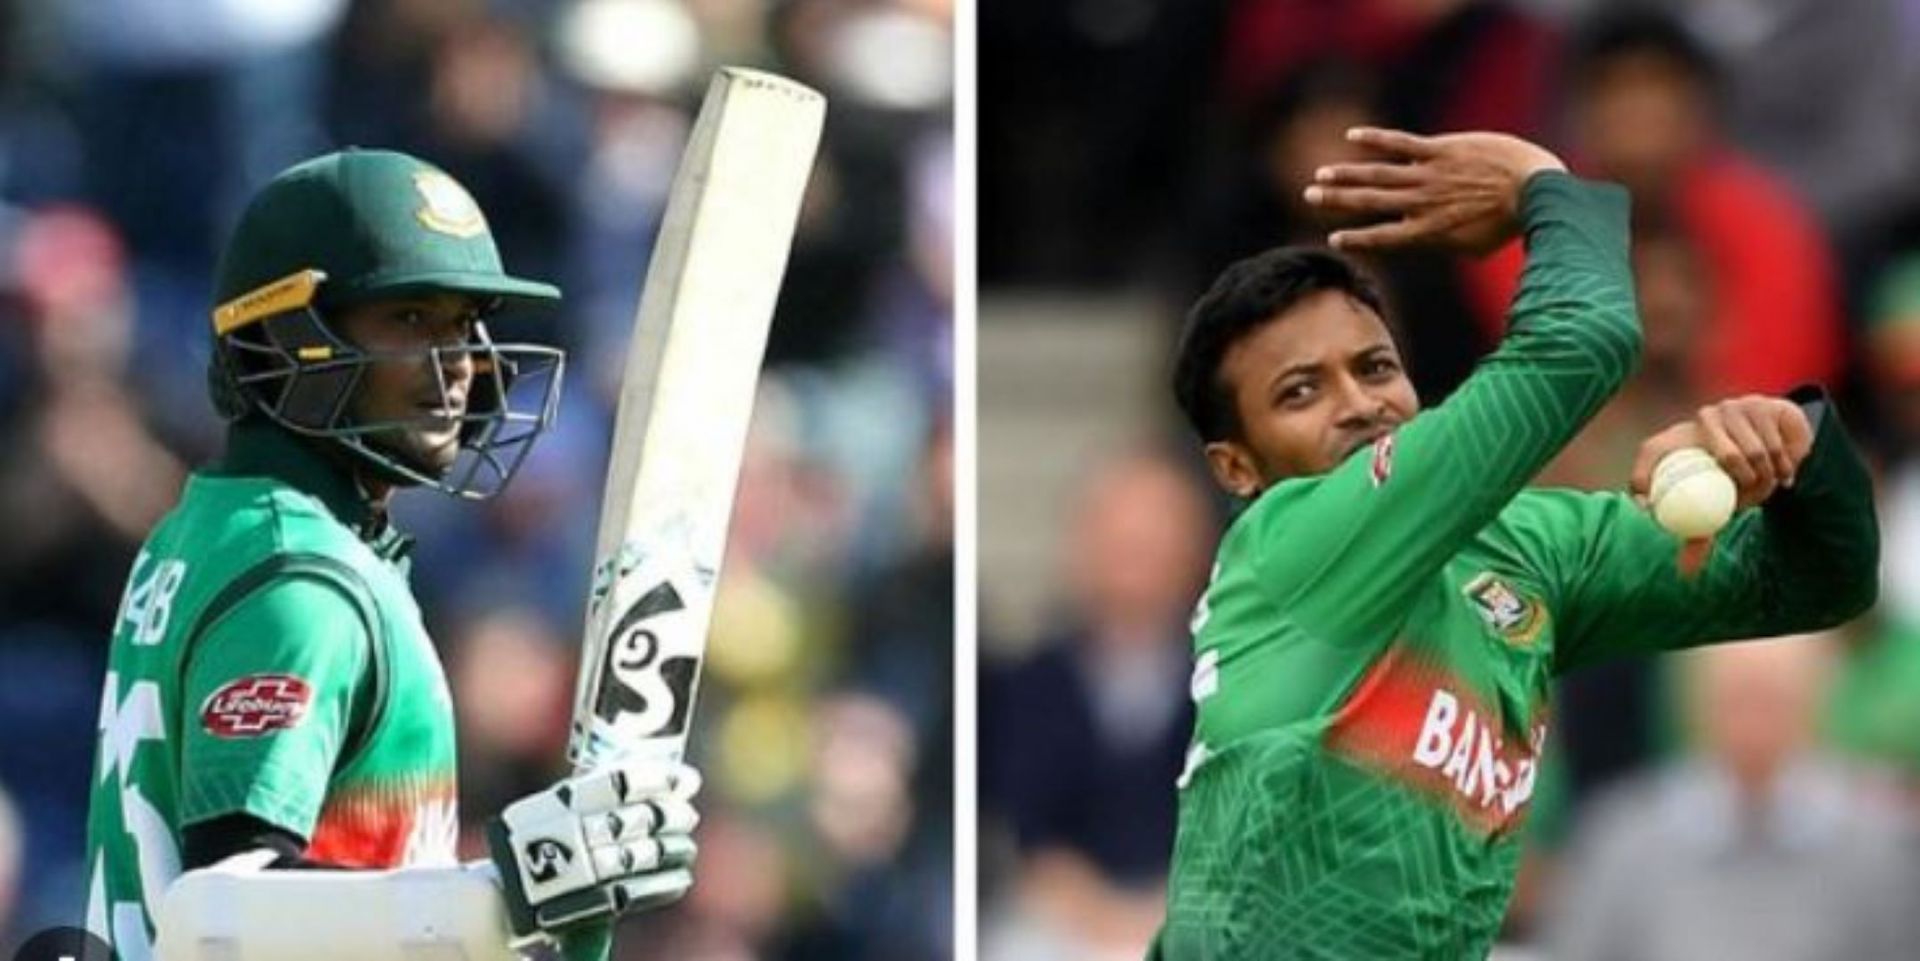 Shakib will have plenty on his plate as captain and star player of Bangladesh in the Asia Cup.